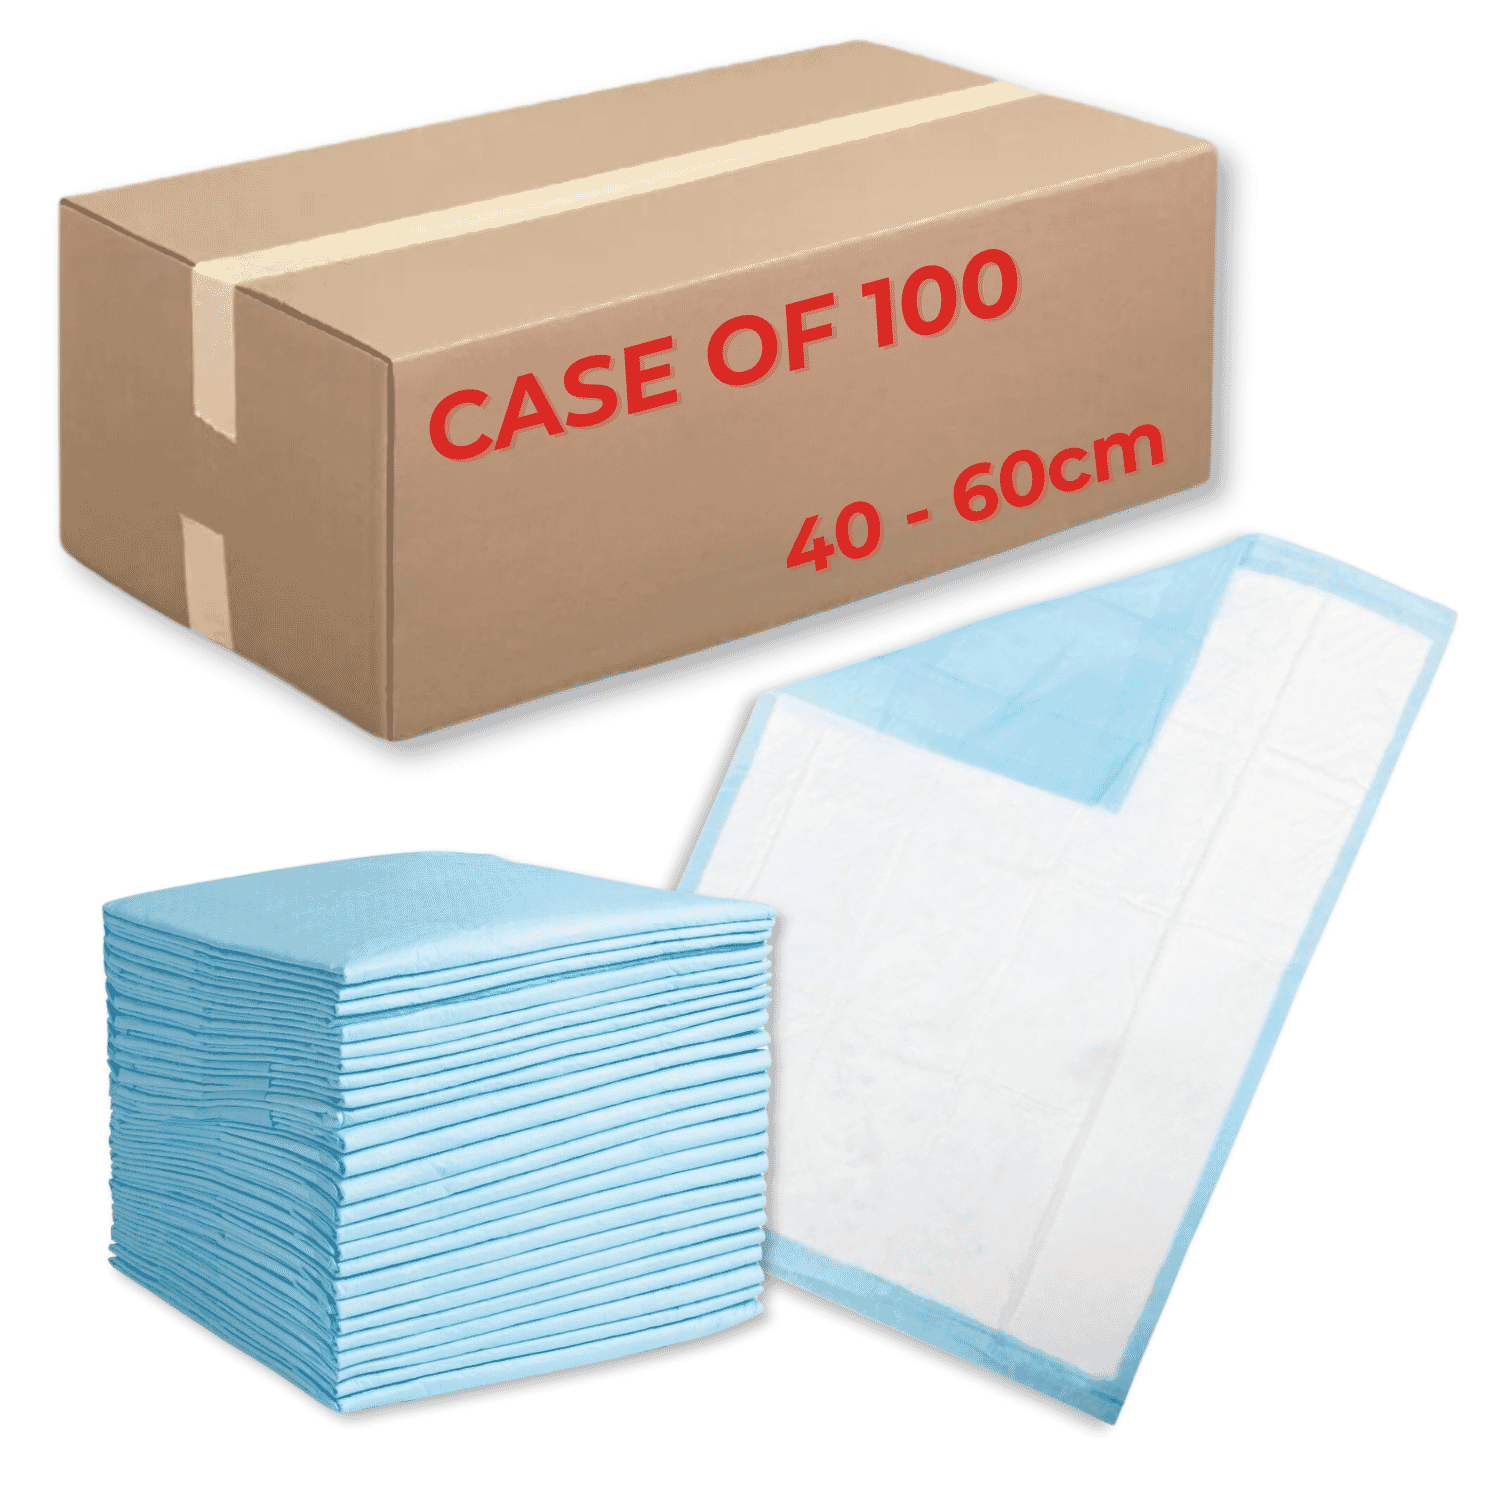 View Disposable Bed Pads 40cm x 60cm Case of 100 information